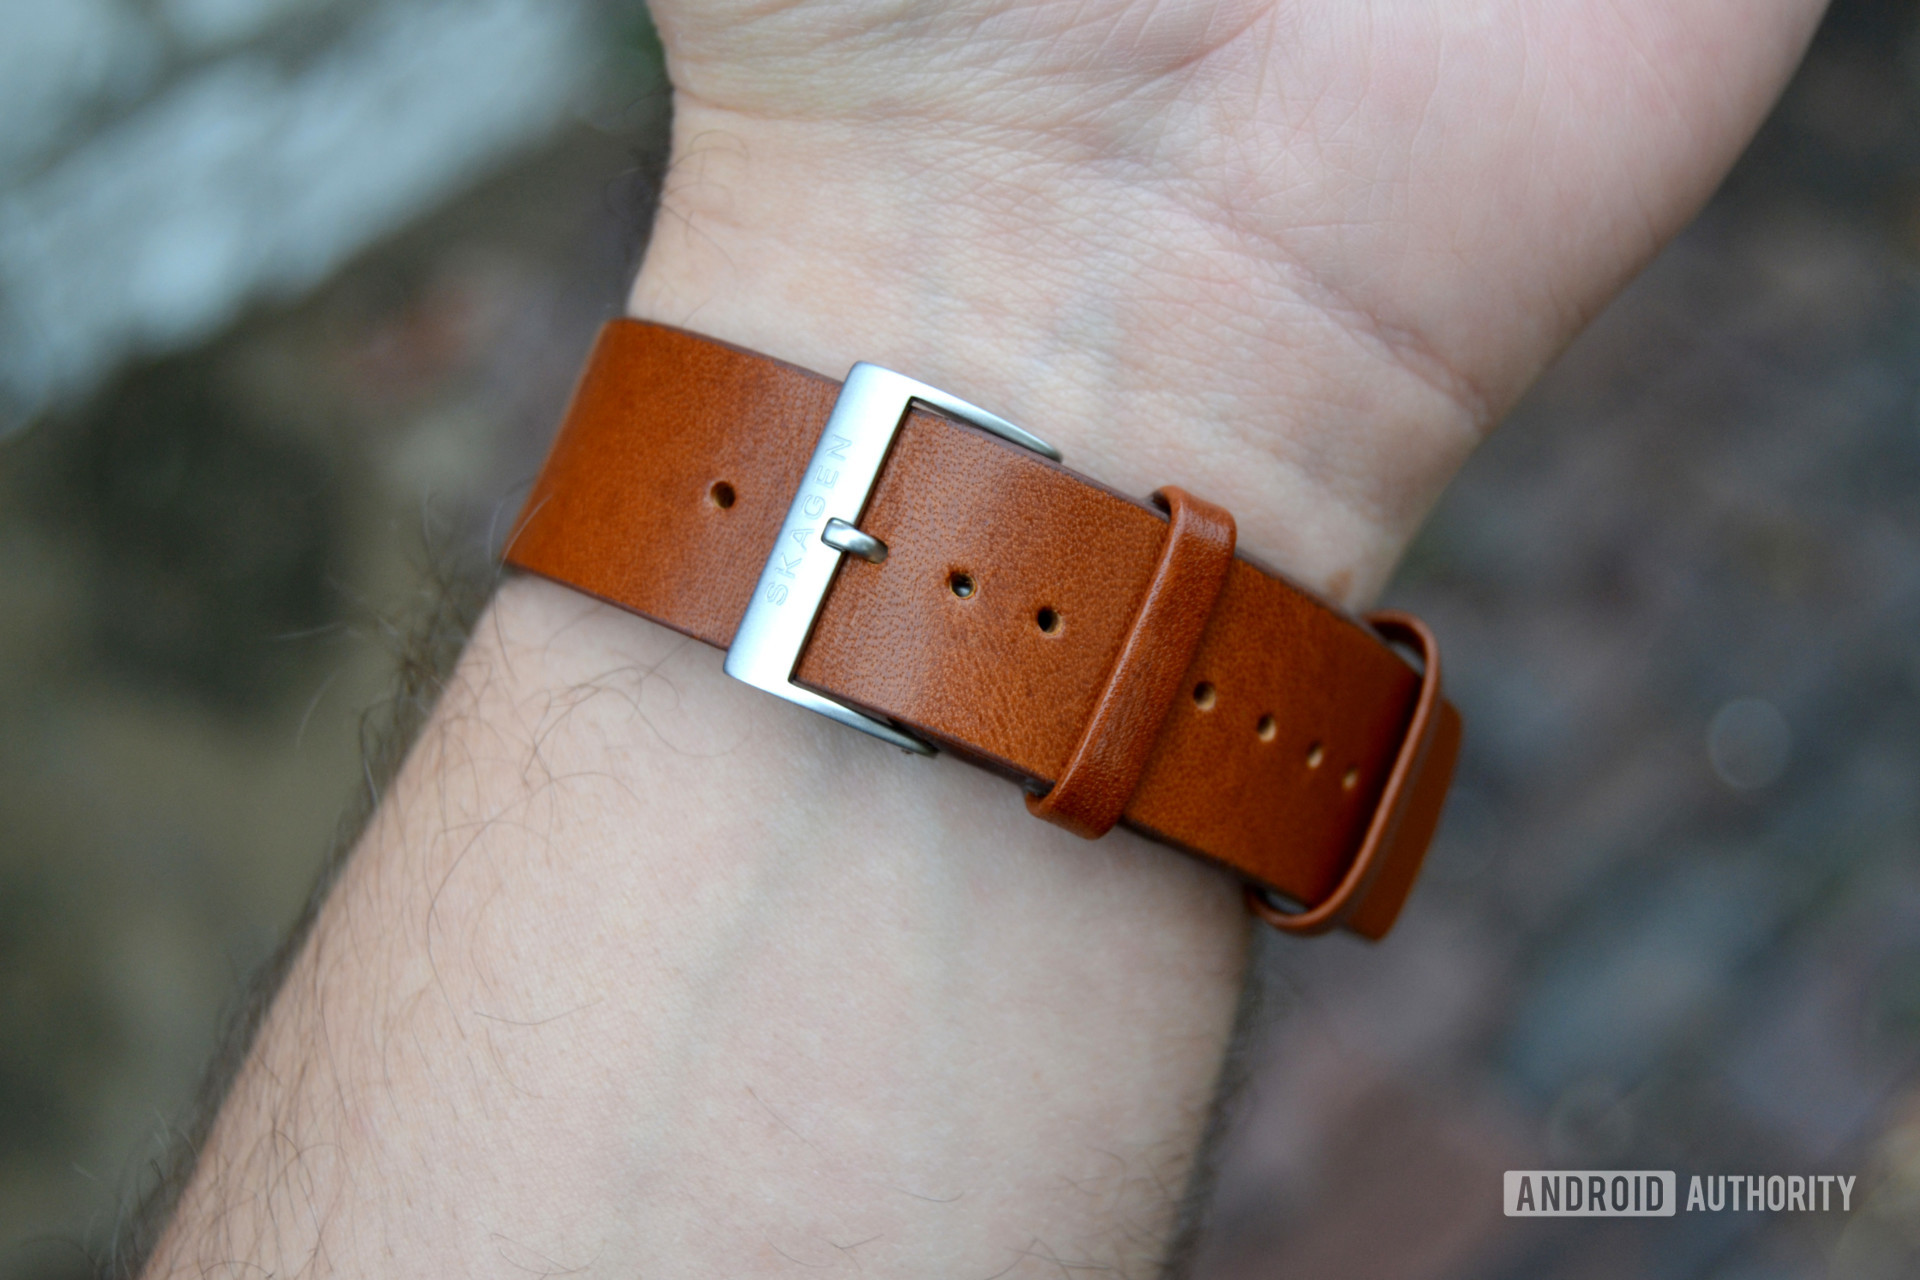 skagen falster 2 review design display watch band leather